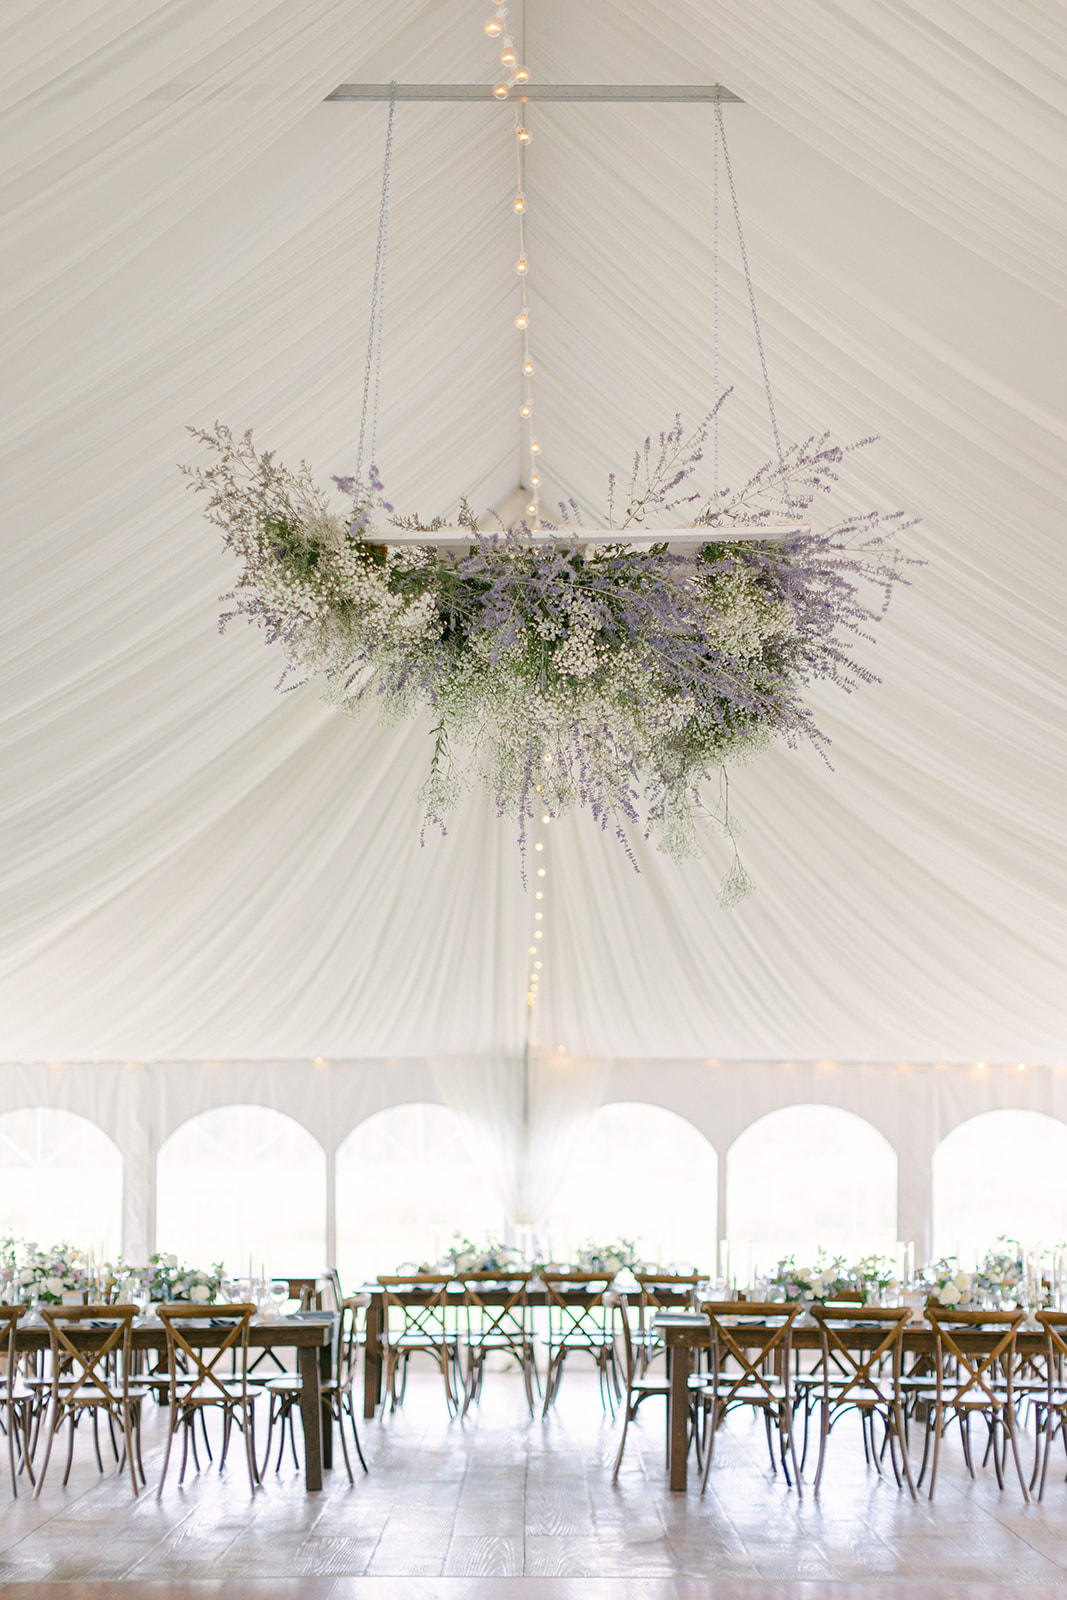 Elegant and timeless reception set-up by Slater Events